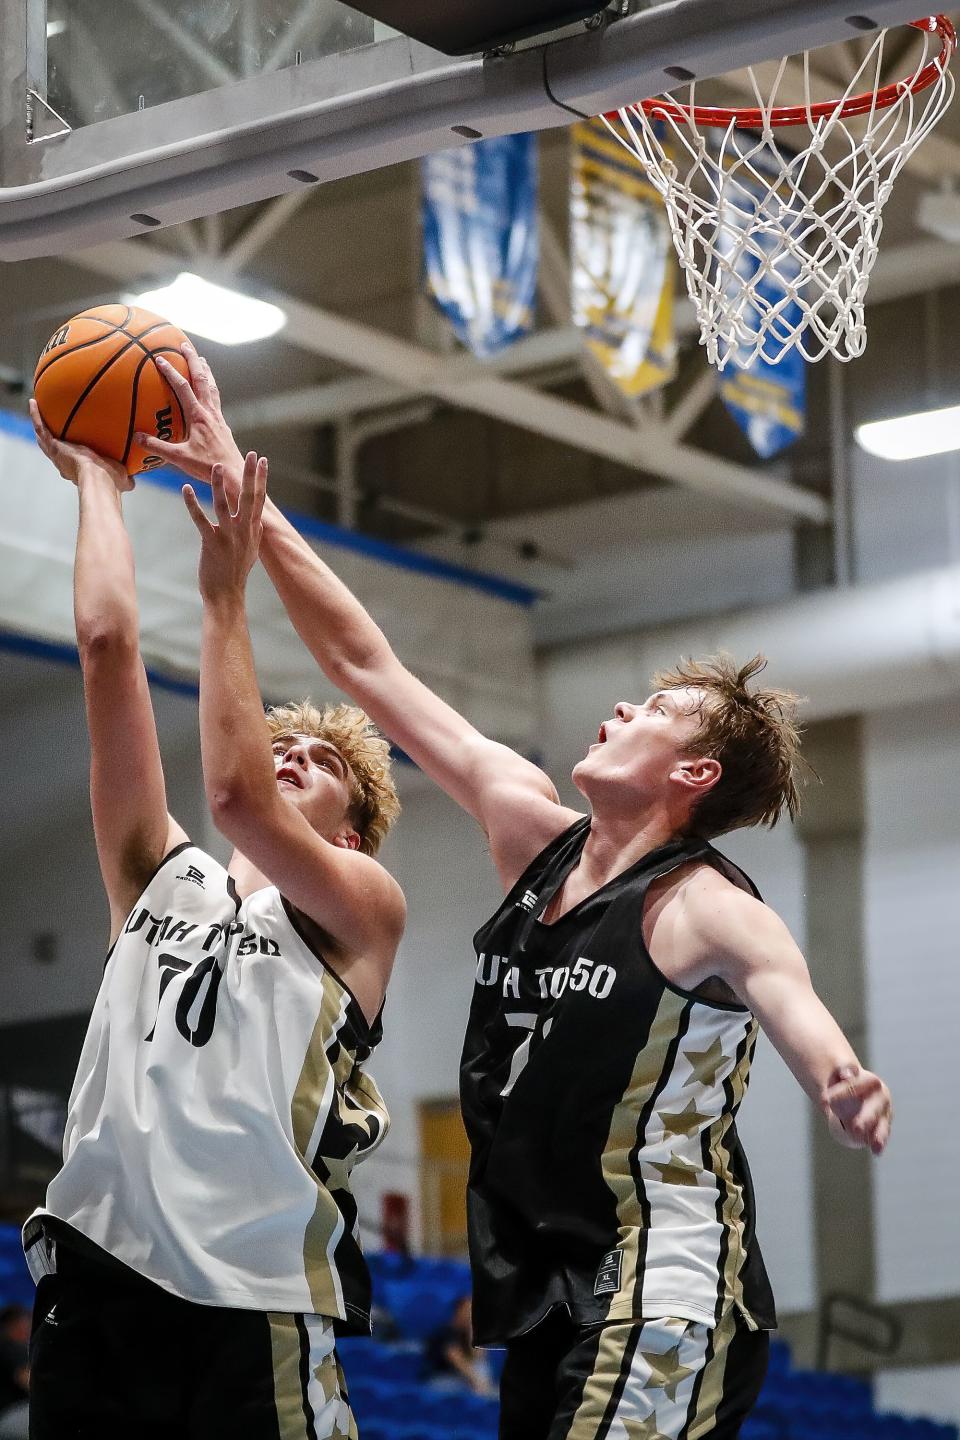 Logan Deal (70), from Sky View High School, has his shot blocked by Jaxon Johnson (76), from Alta High School, during the Utah Top 50 Elite League play at Salt Lake Community College’s Bruin Arena in Taylorsville, Utah on Monday, Sept. 26, 2022 | Adam Fondren, for the Deseret News